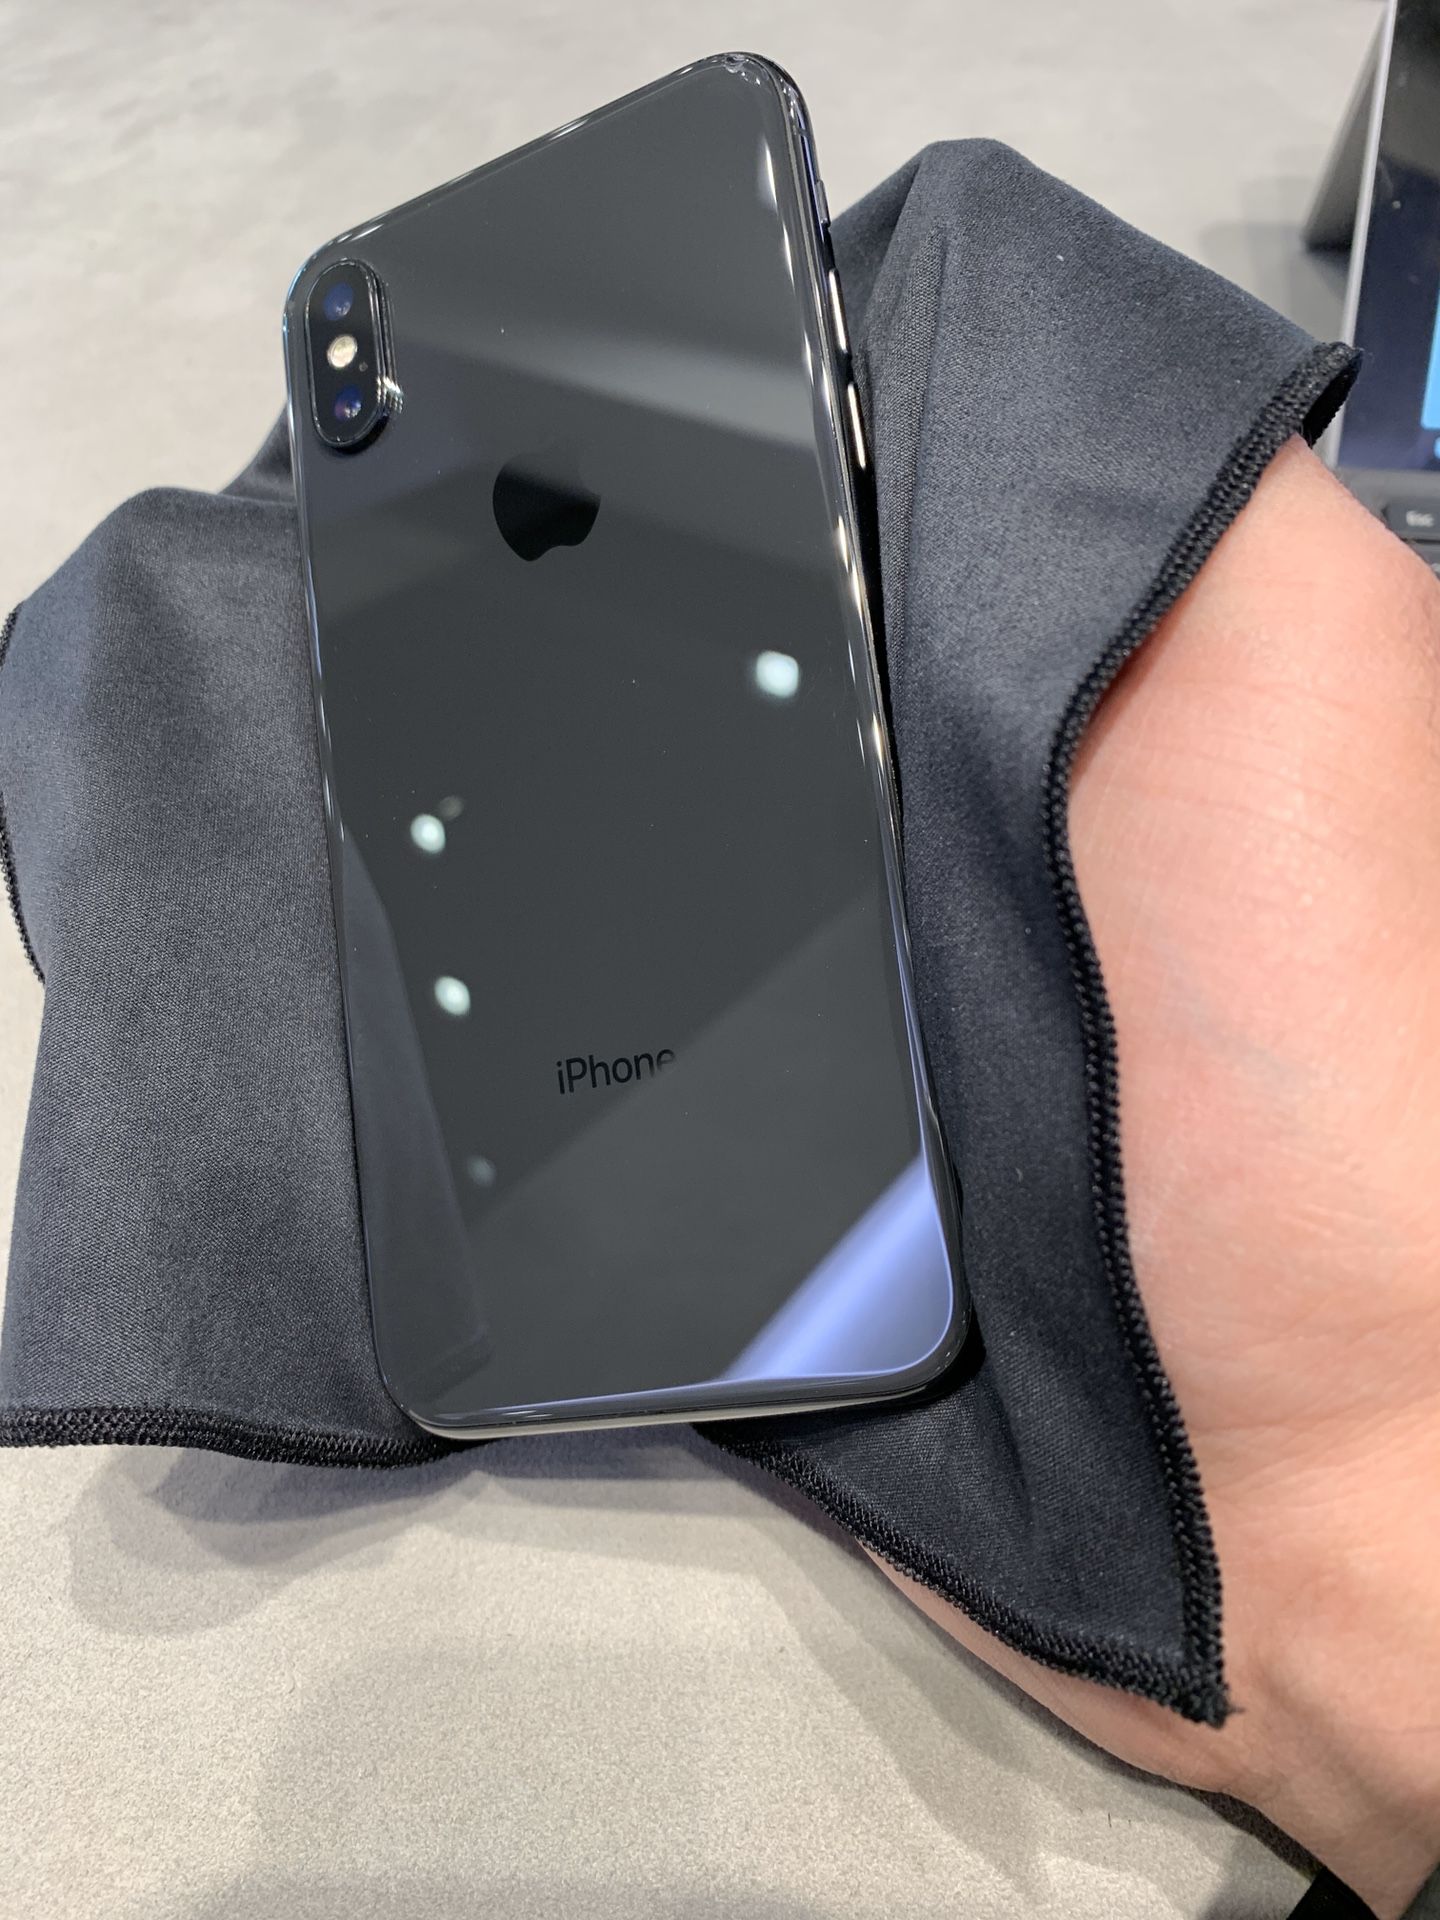 iPhone X Unlocked Any Carrier